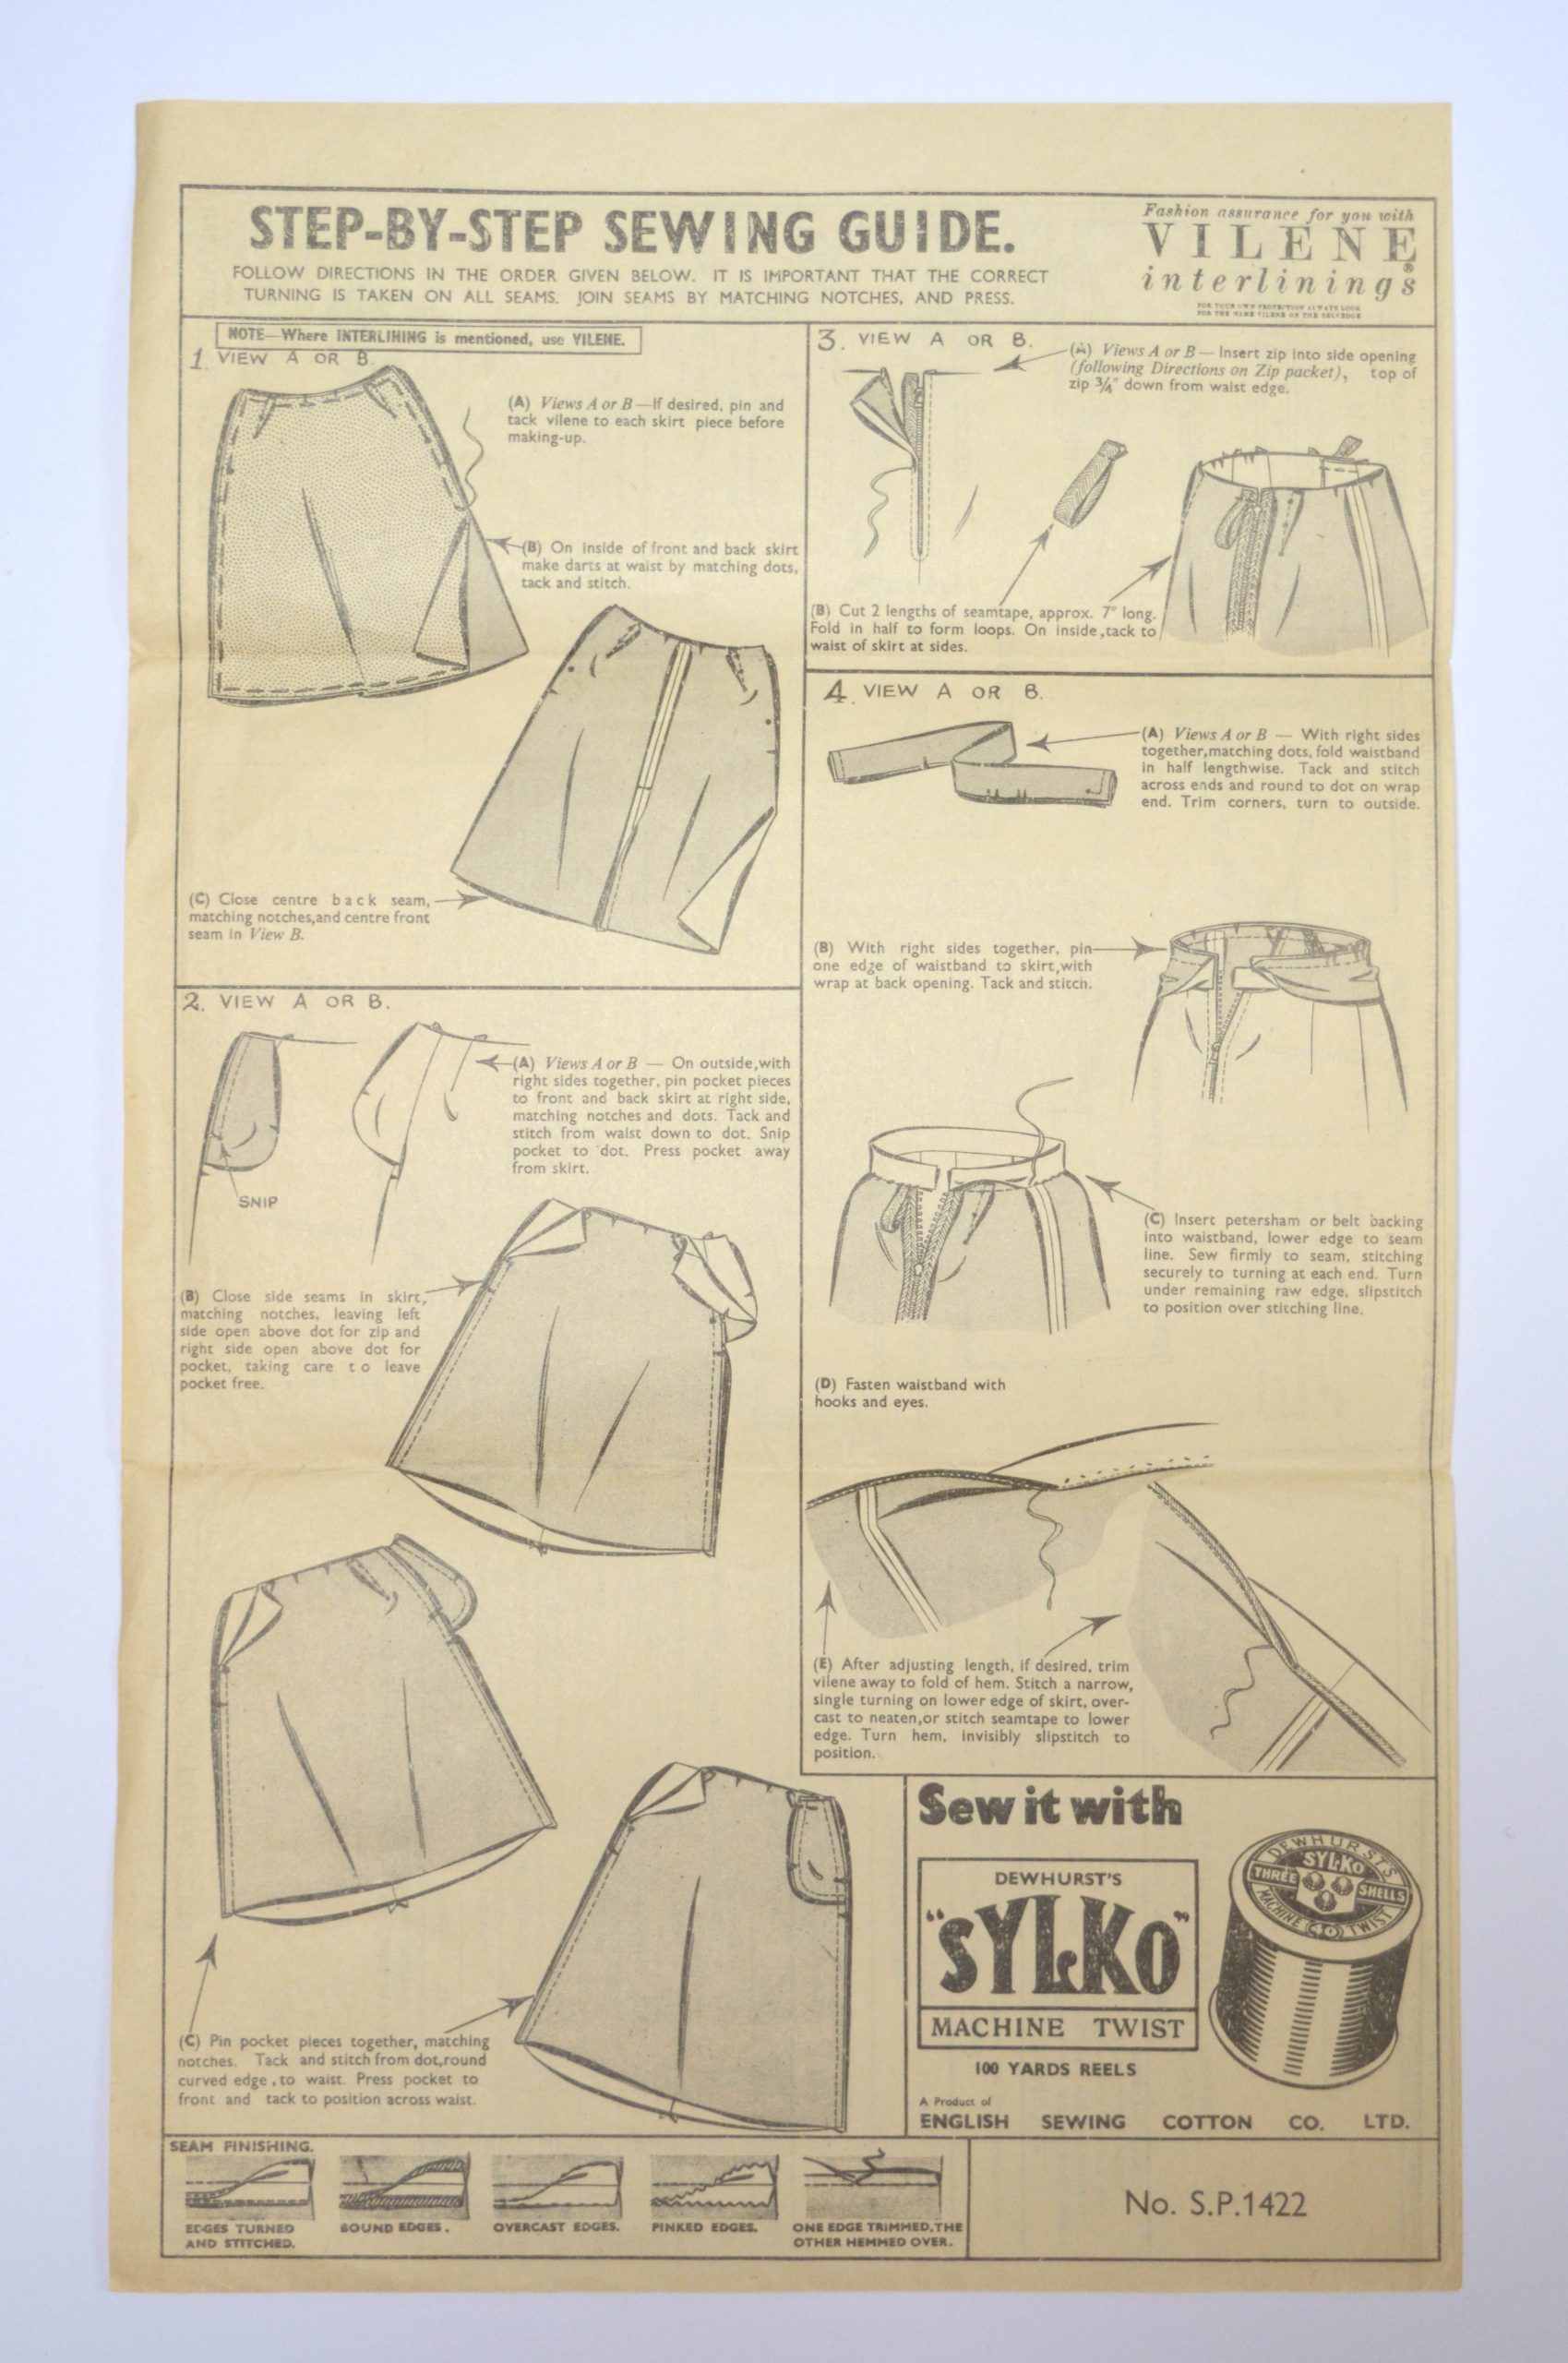 Following a 1940's Pants Pattern : Sewing through the Decades